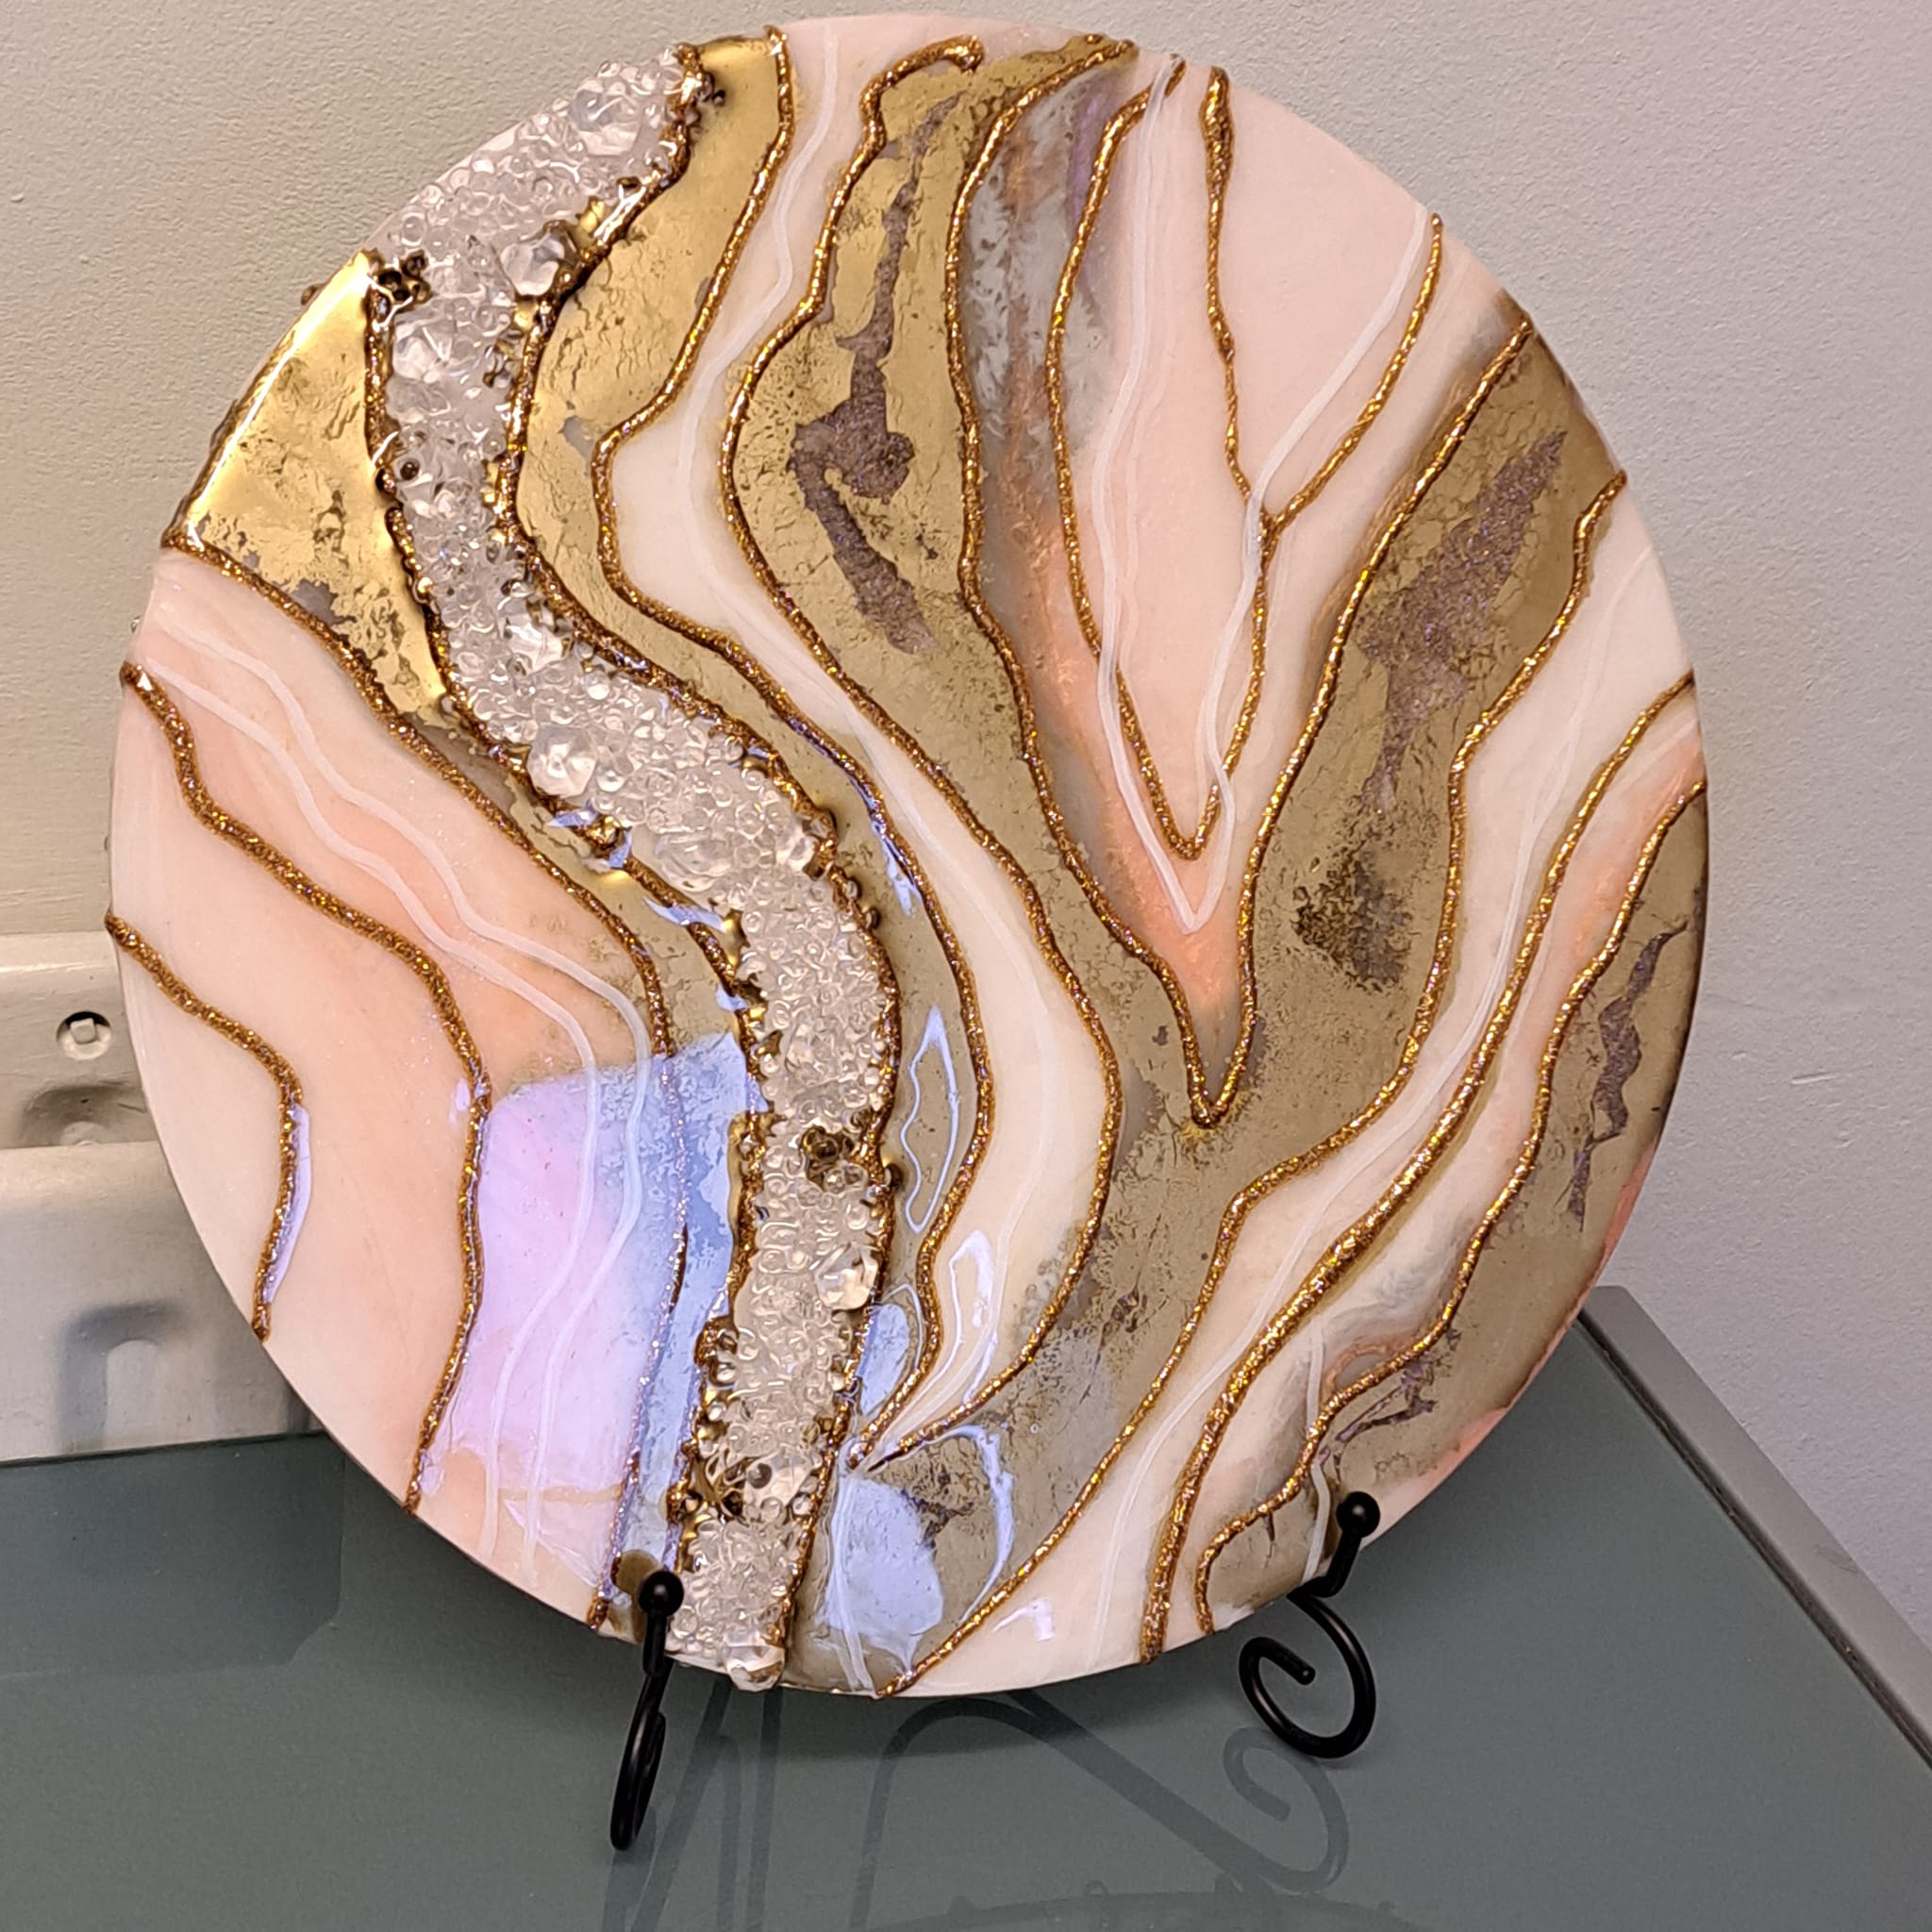 Large hint of peach white gold breastmilk geode art - only one - see video.